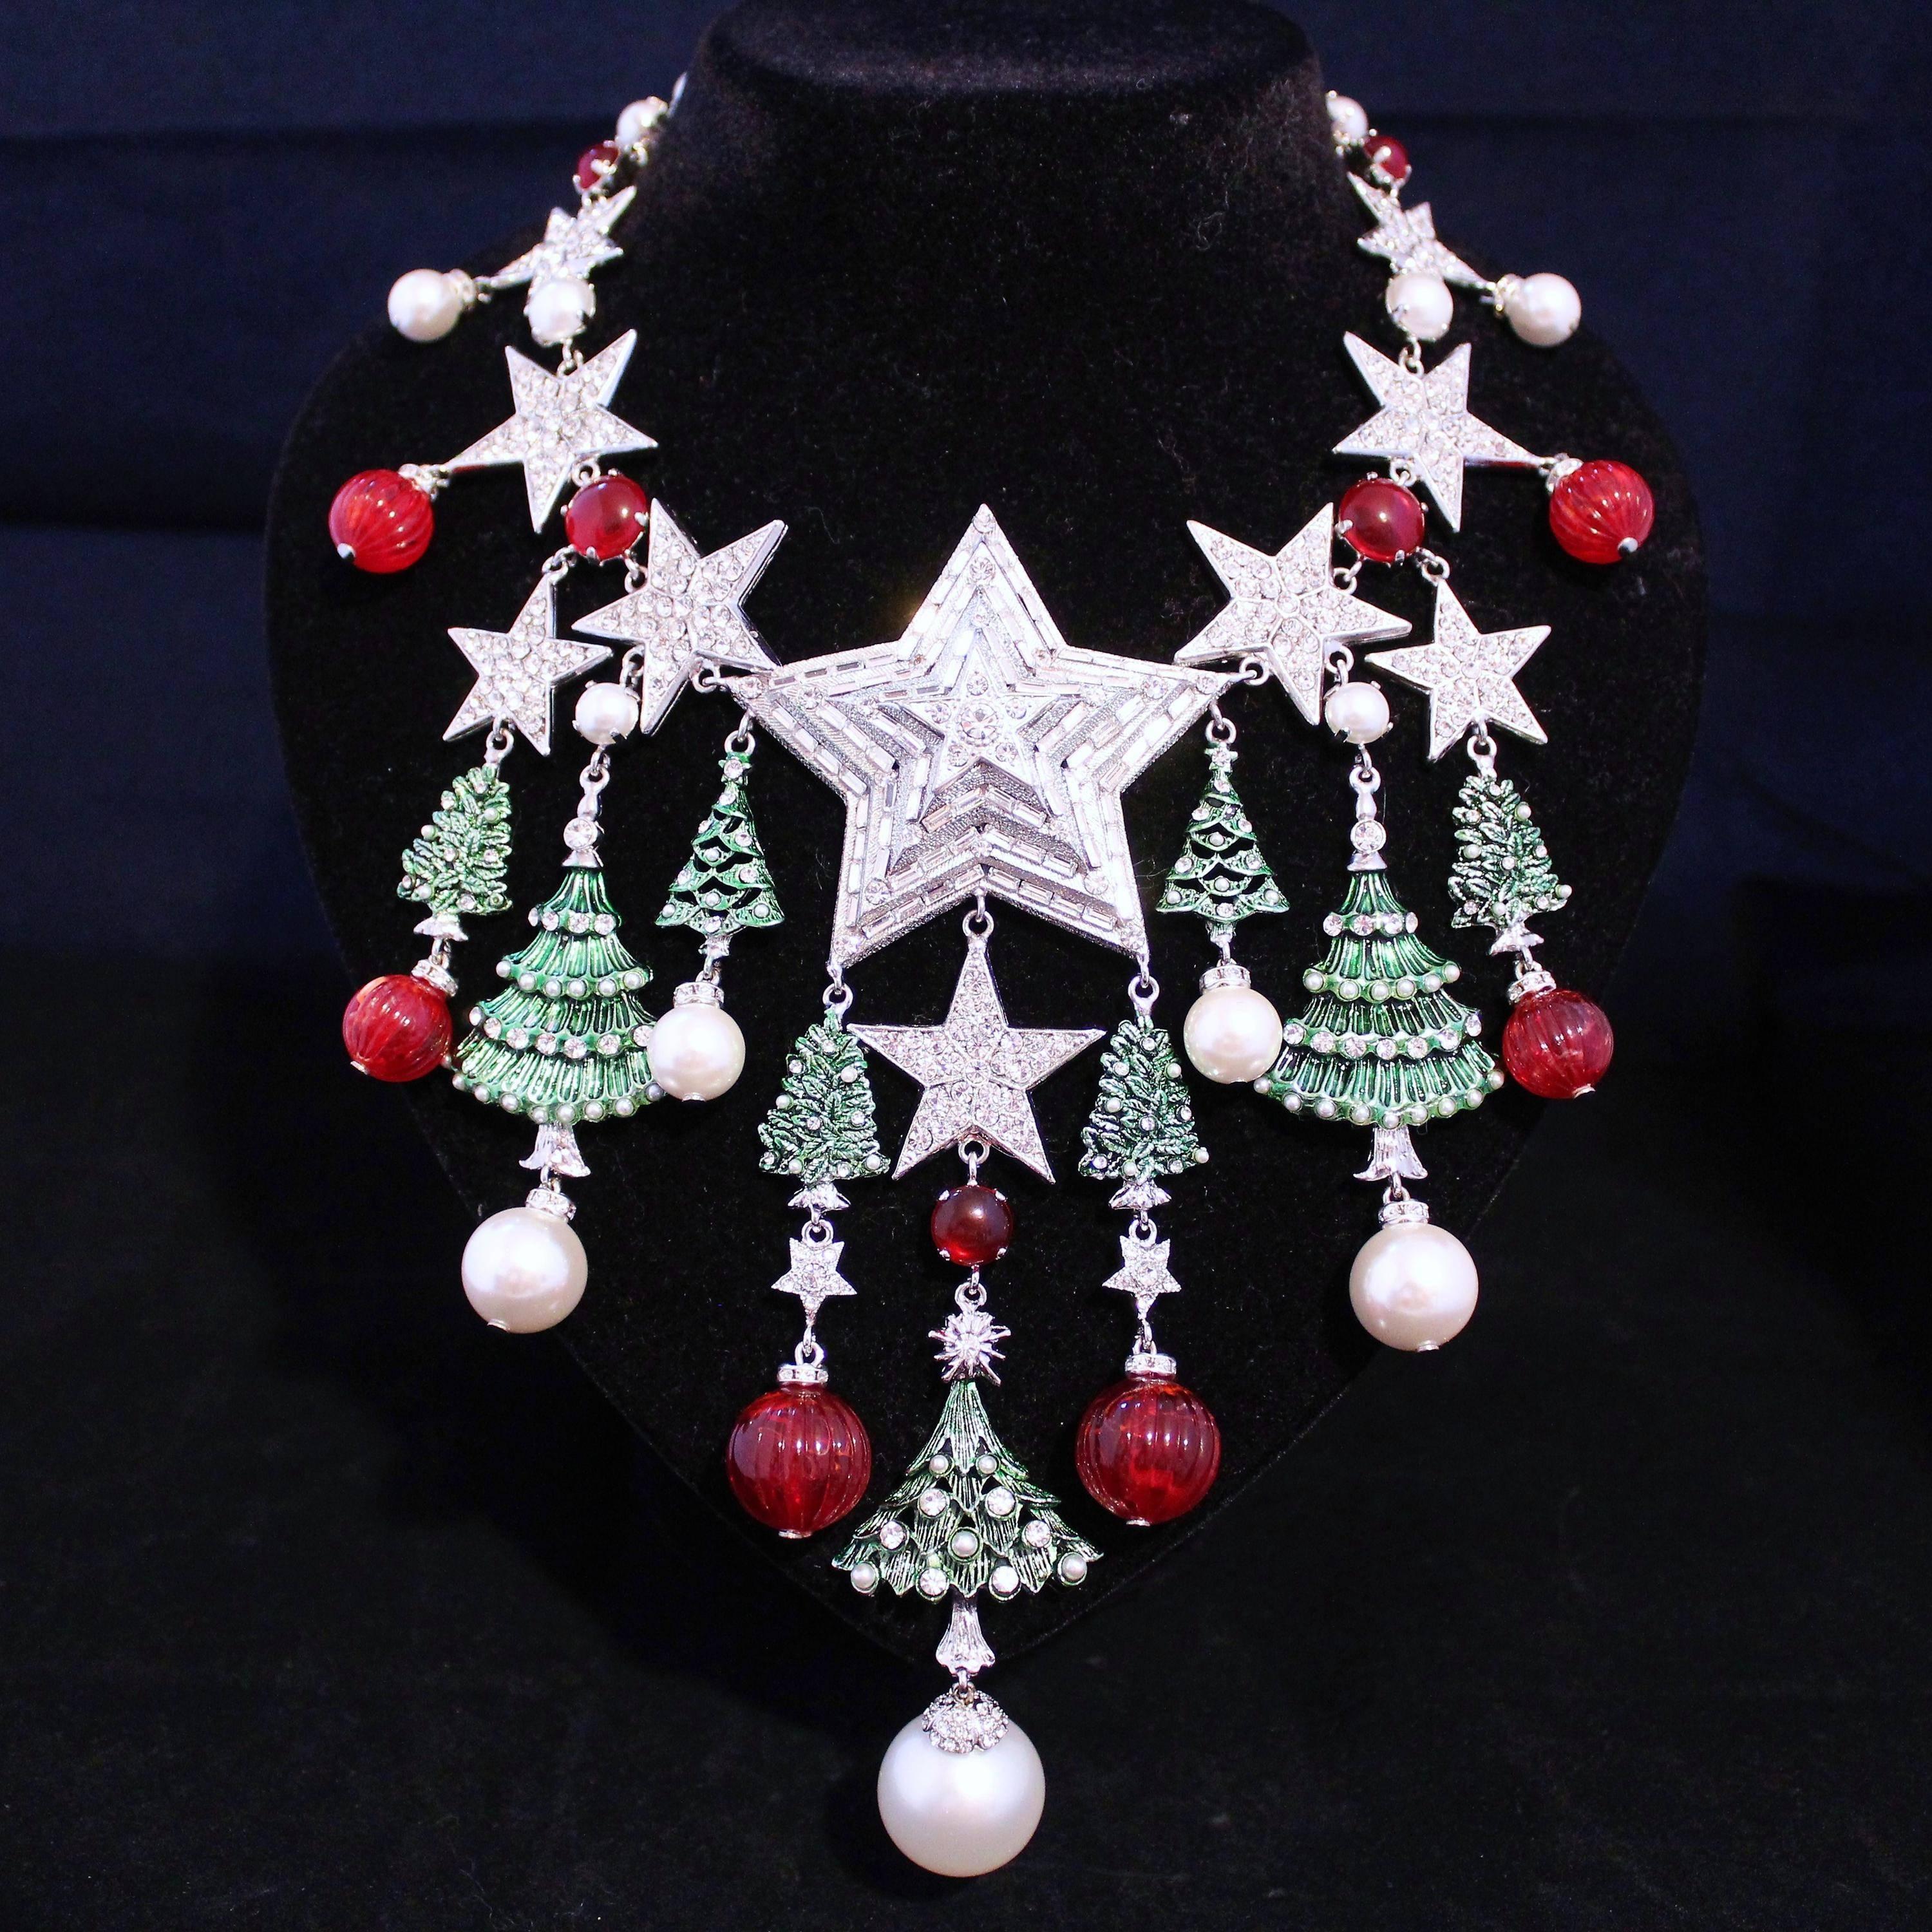 Superb and funny Christmas necklace by Carlo Zini
One of the greatest world bijoux designers
Christmas theme, stars and trees
Non allergenic rhodium
Amazing hand creation of class A swarovsky crystals and colored resins
11 Stars, 9 trees
Central